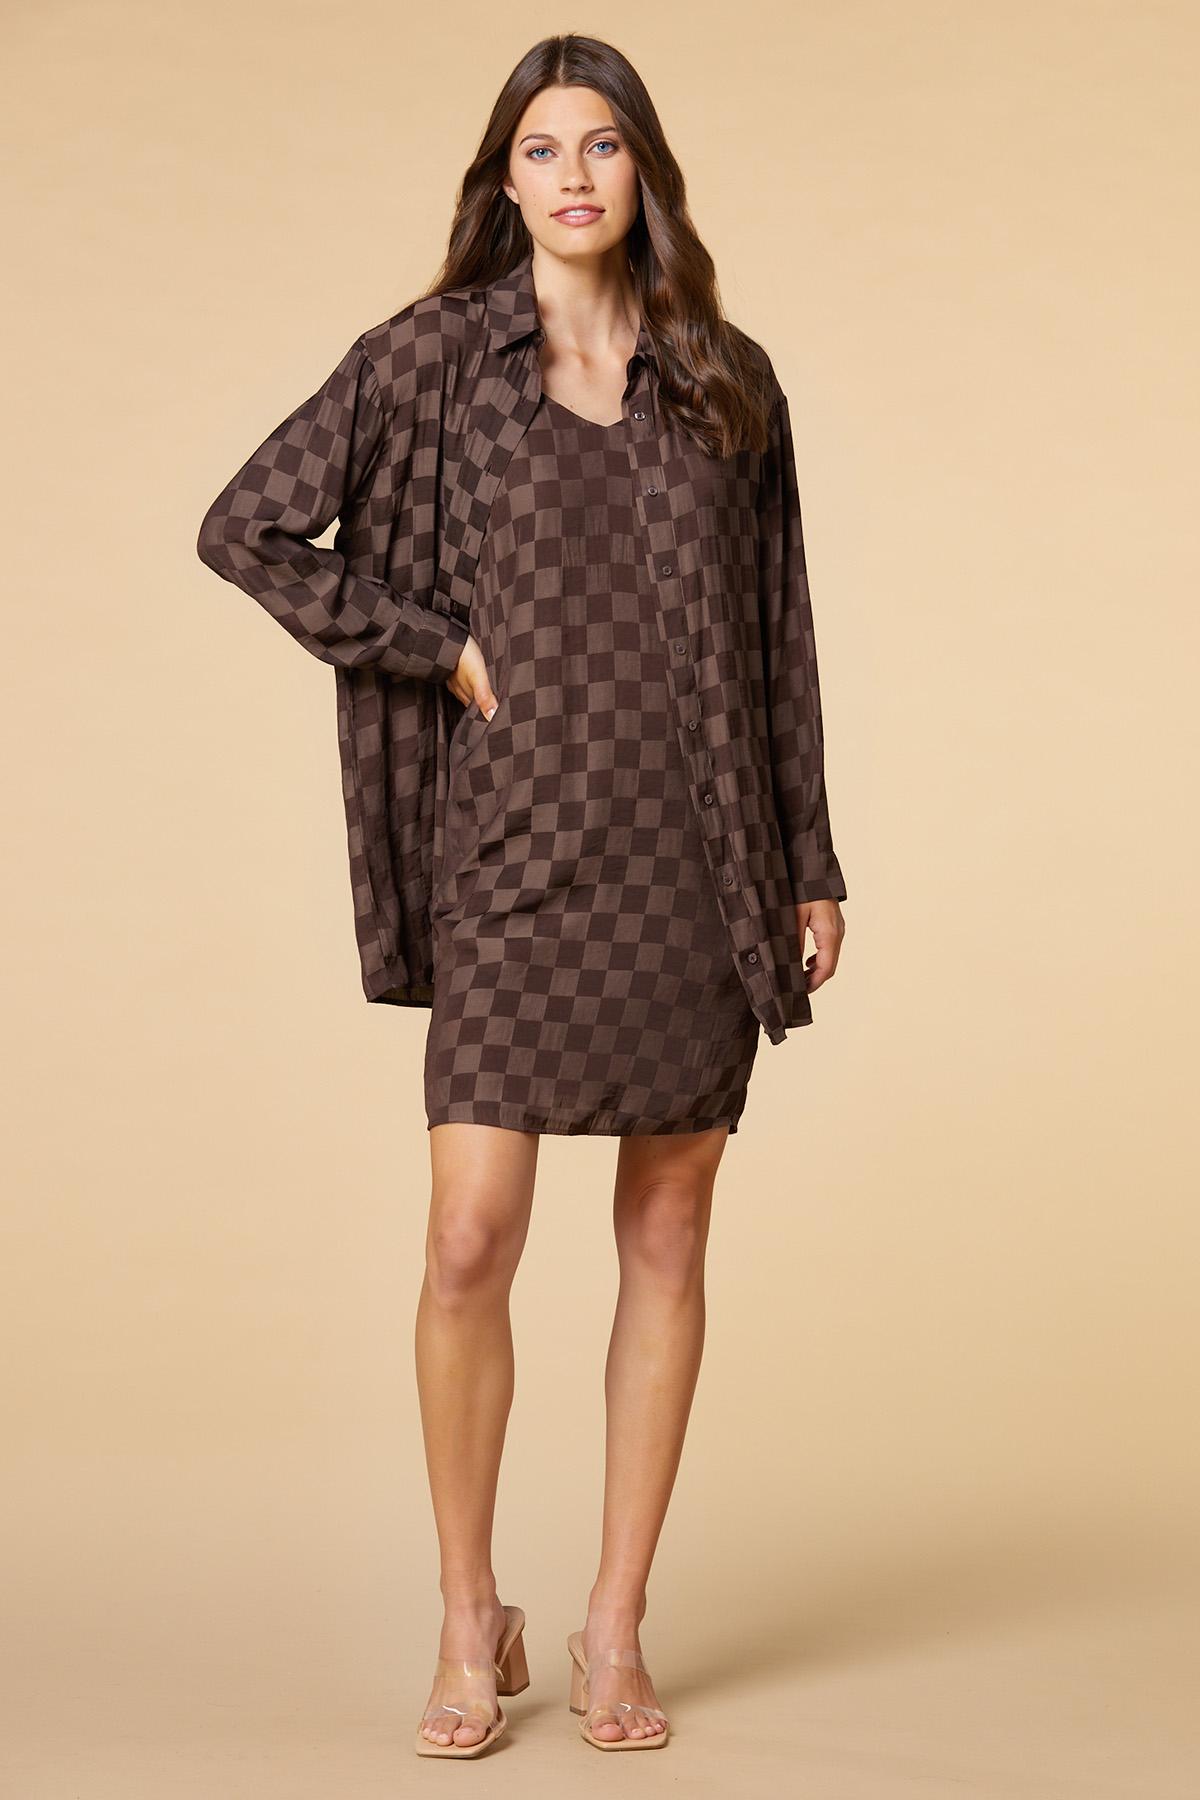 Louis Vuitton Monogram Print Long-Sleeved Dress L NEW With Tags